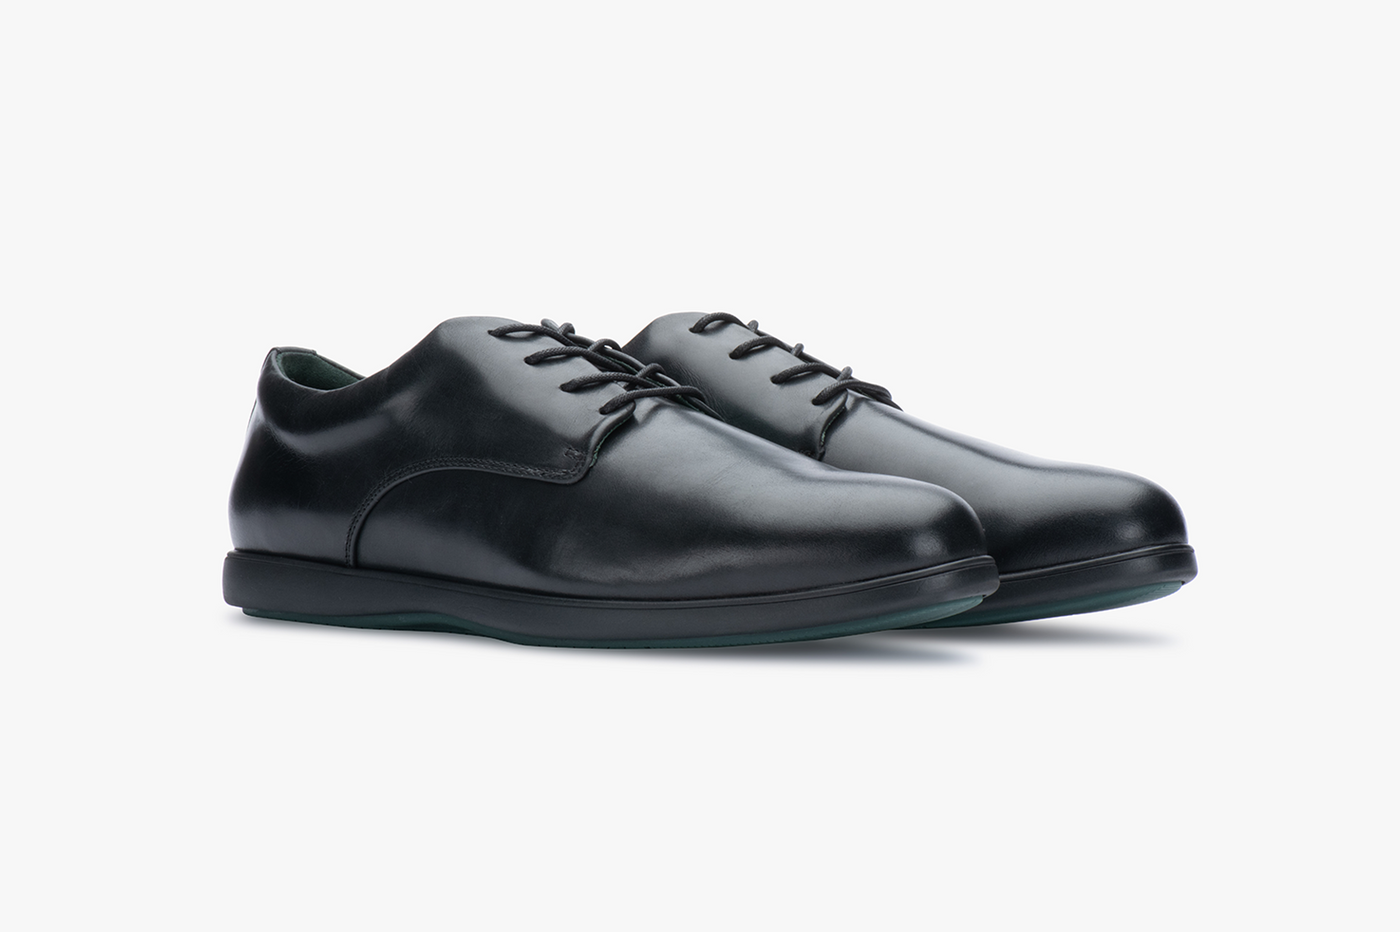 Luxury Formal Shoes Brands France, SAVE 34% 